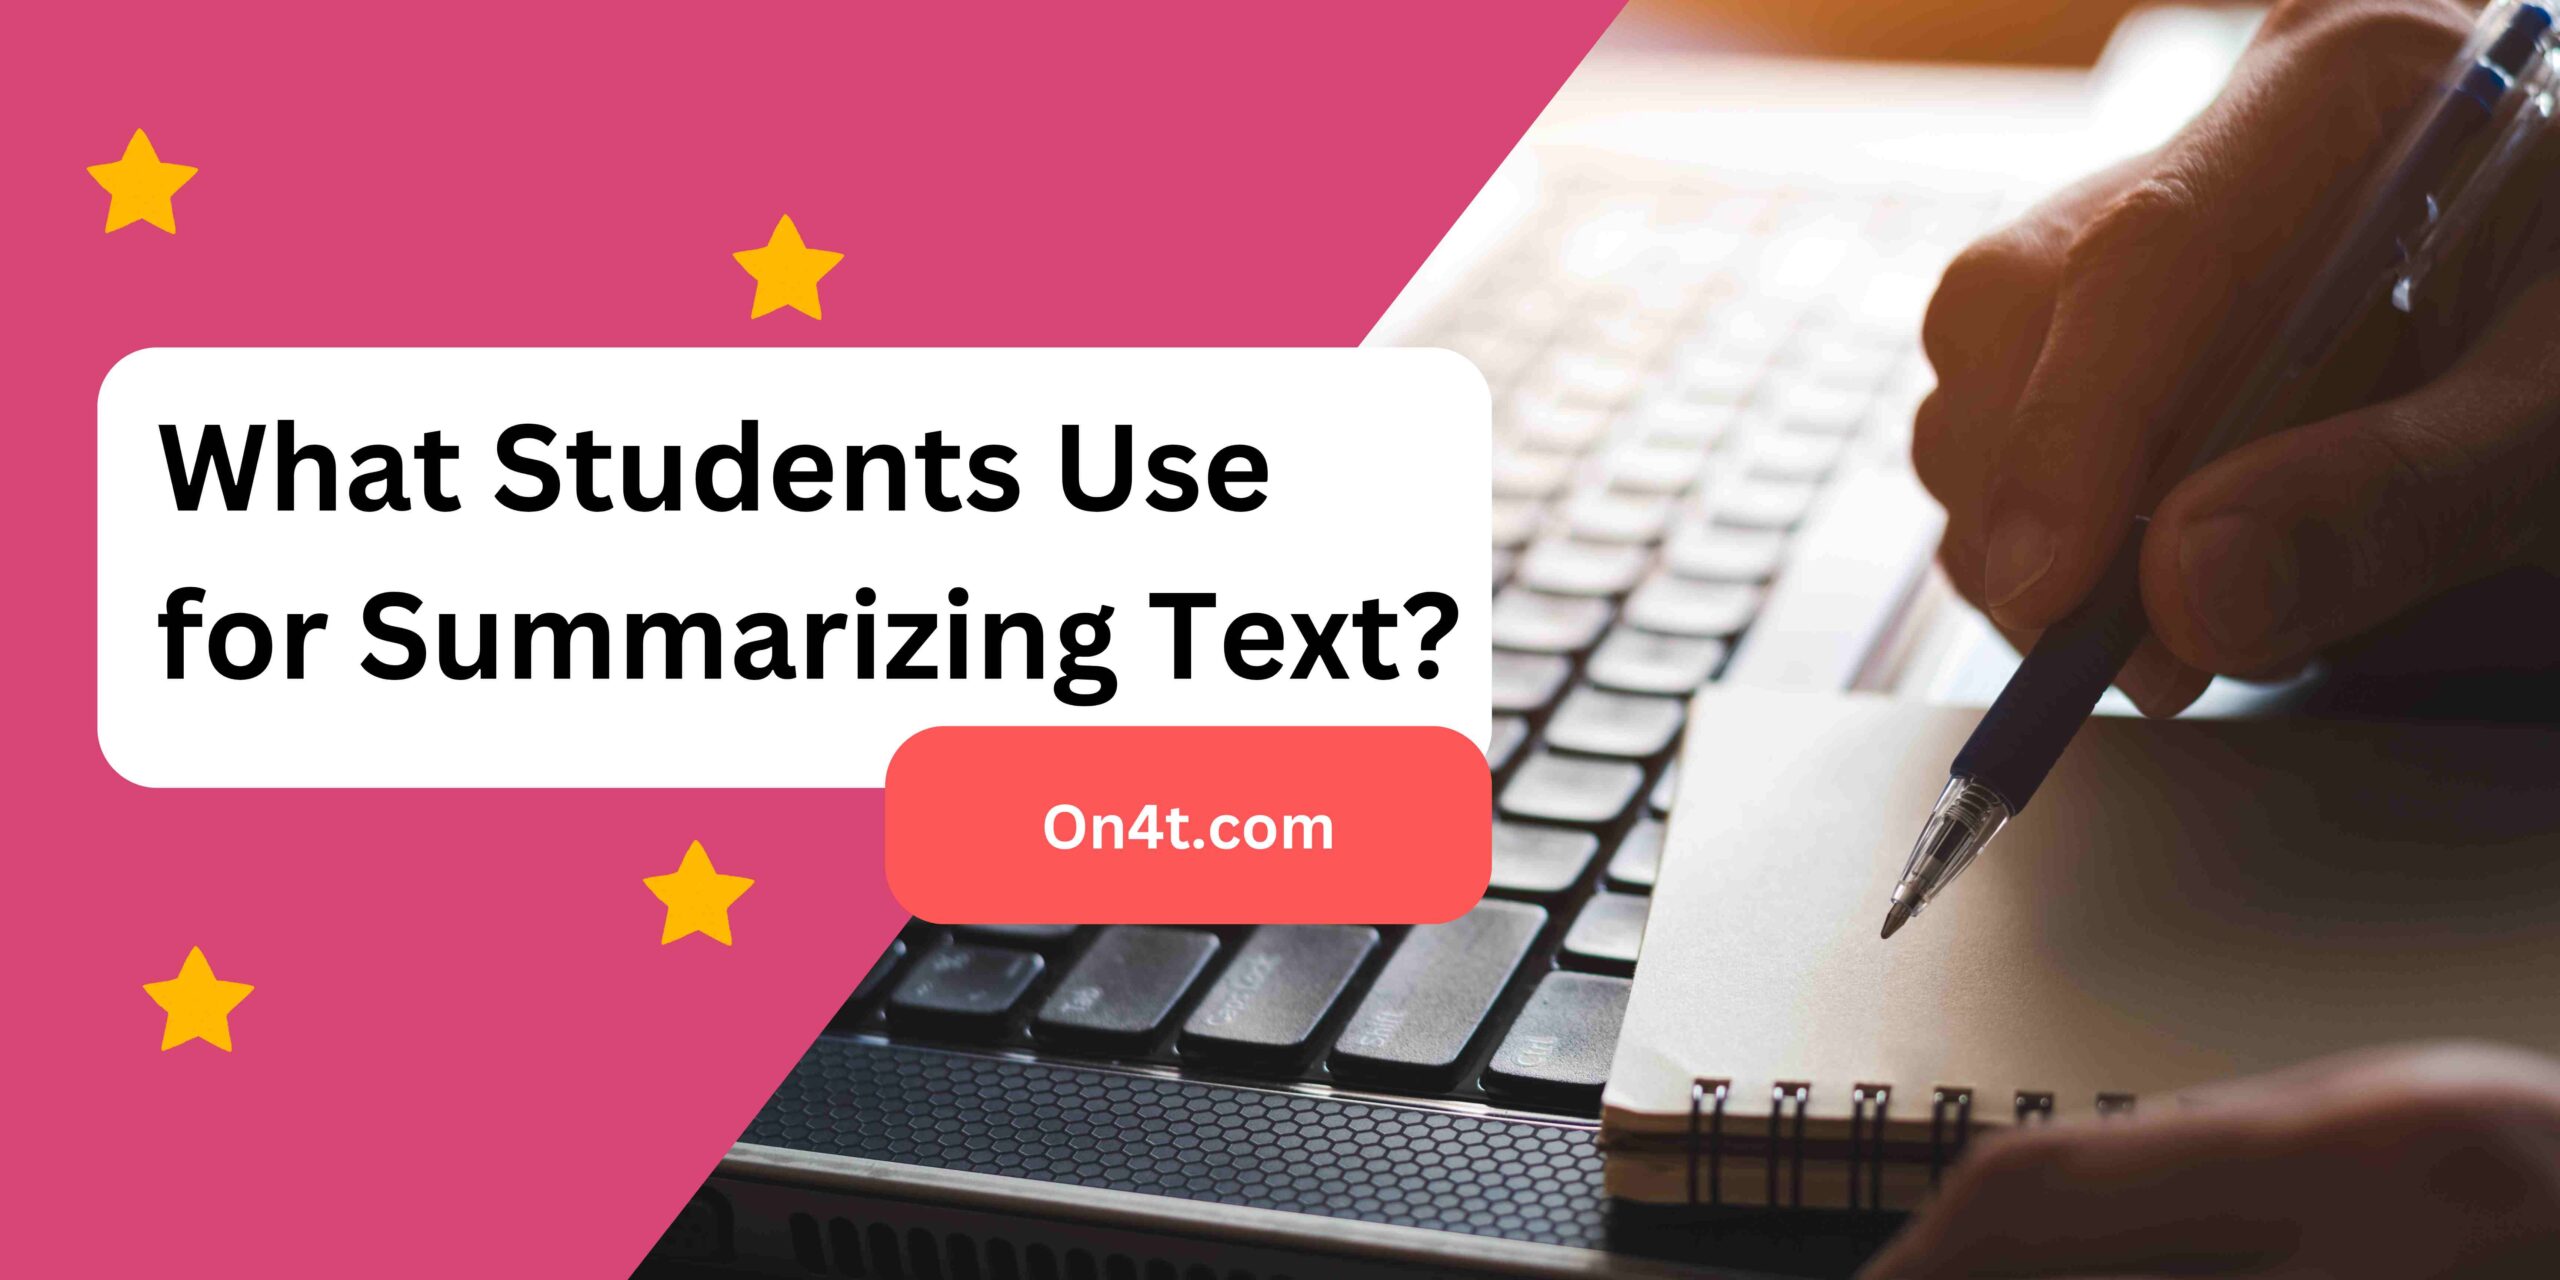 What Students Use for Summarizing Text?